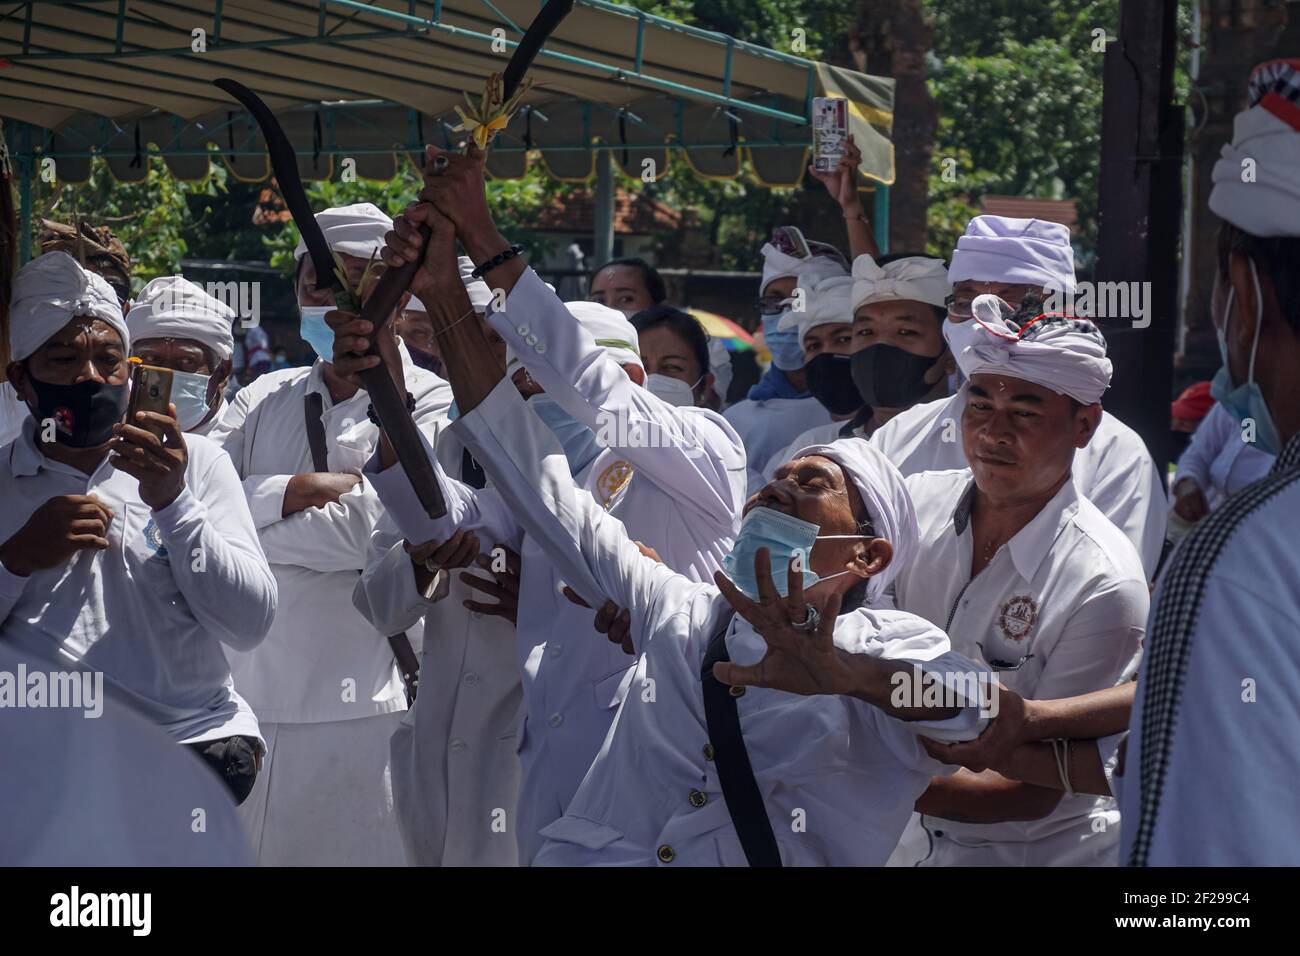 Badung, Bali, Indonesia. 10th Mar, 2021. A devotee seen as he trance during the event. Balinese Hindu to celebrate Melasti, a soul-cleansing ceremony at Petitenget Beach before Nyepi, the Day of Silence, holiday. Nyepi will be held on March 14, 2021, which marks New Year in Balinese calendar. By the Covid-19 outbreak, Melasti this year only limited for few selected people. In the normal condition there are thousands of them. (Credit Image: © Dicky BisinglasiZUMA Wire) Stock Photo